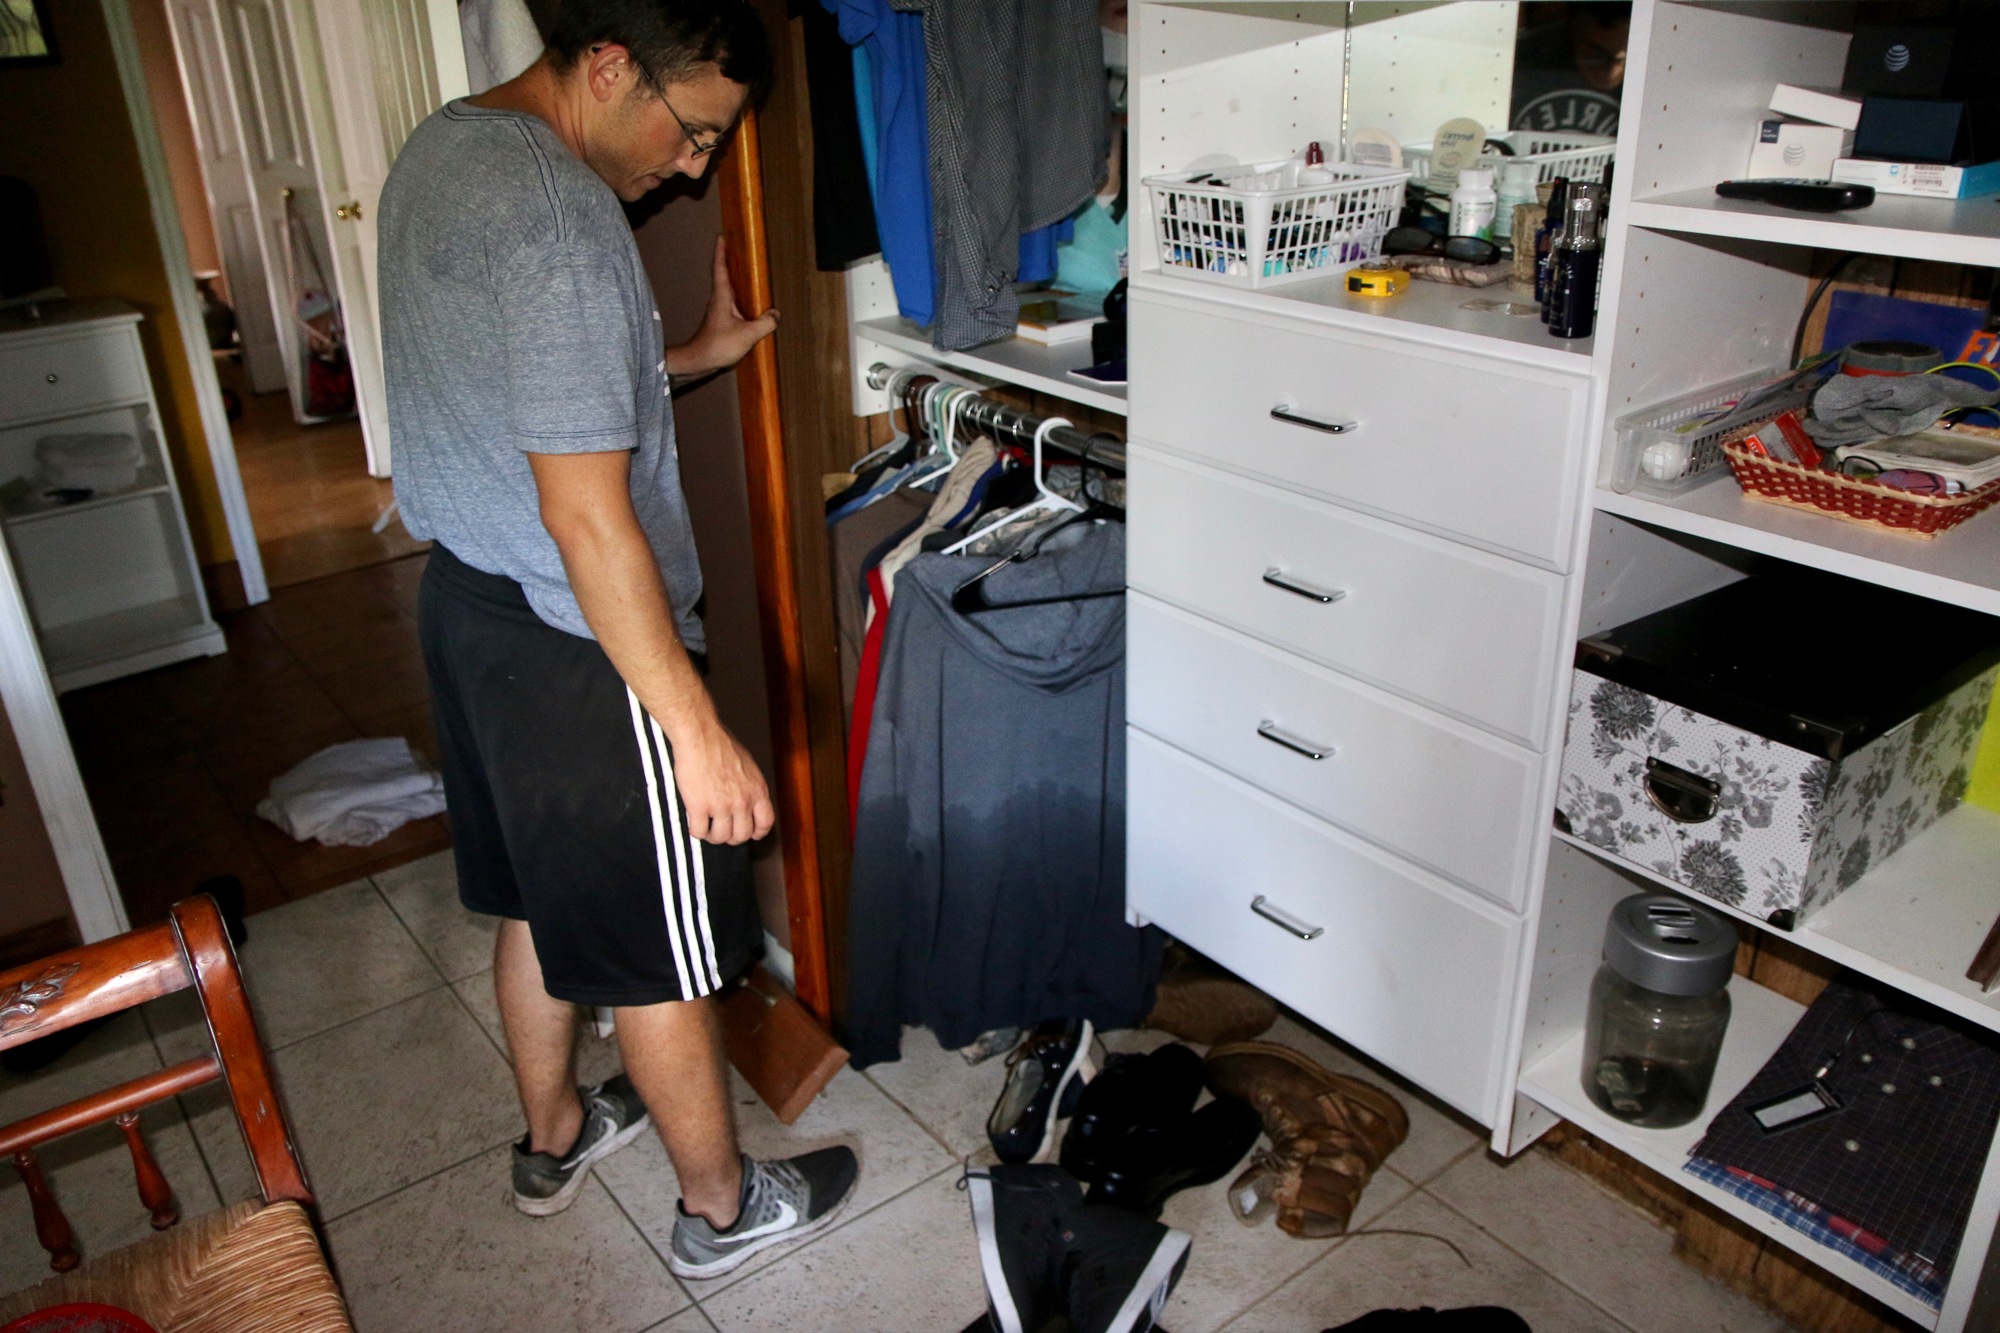 Sivan Shany points to the water mark left in his closet after the Oshris' home was flooded by Hurricane Irma. Photo by Ray Boone